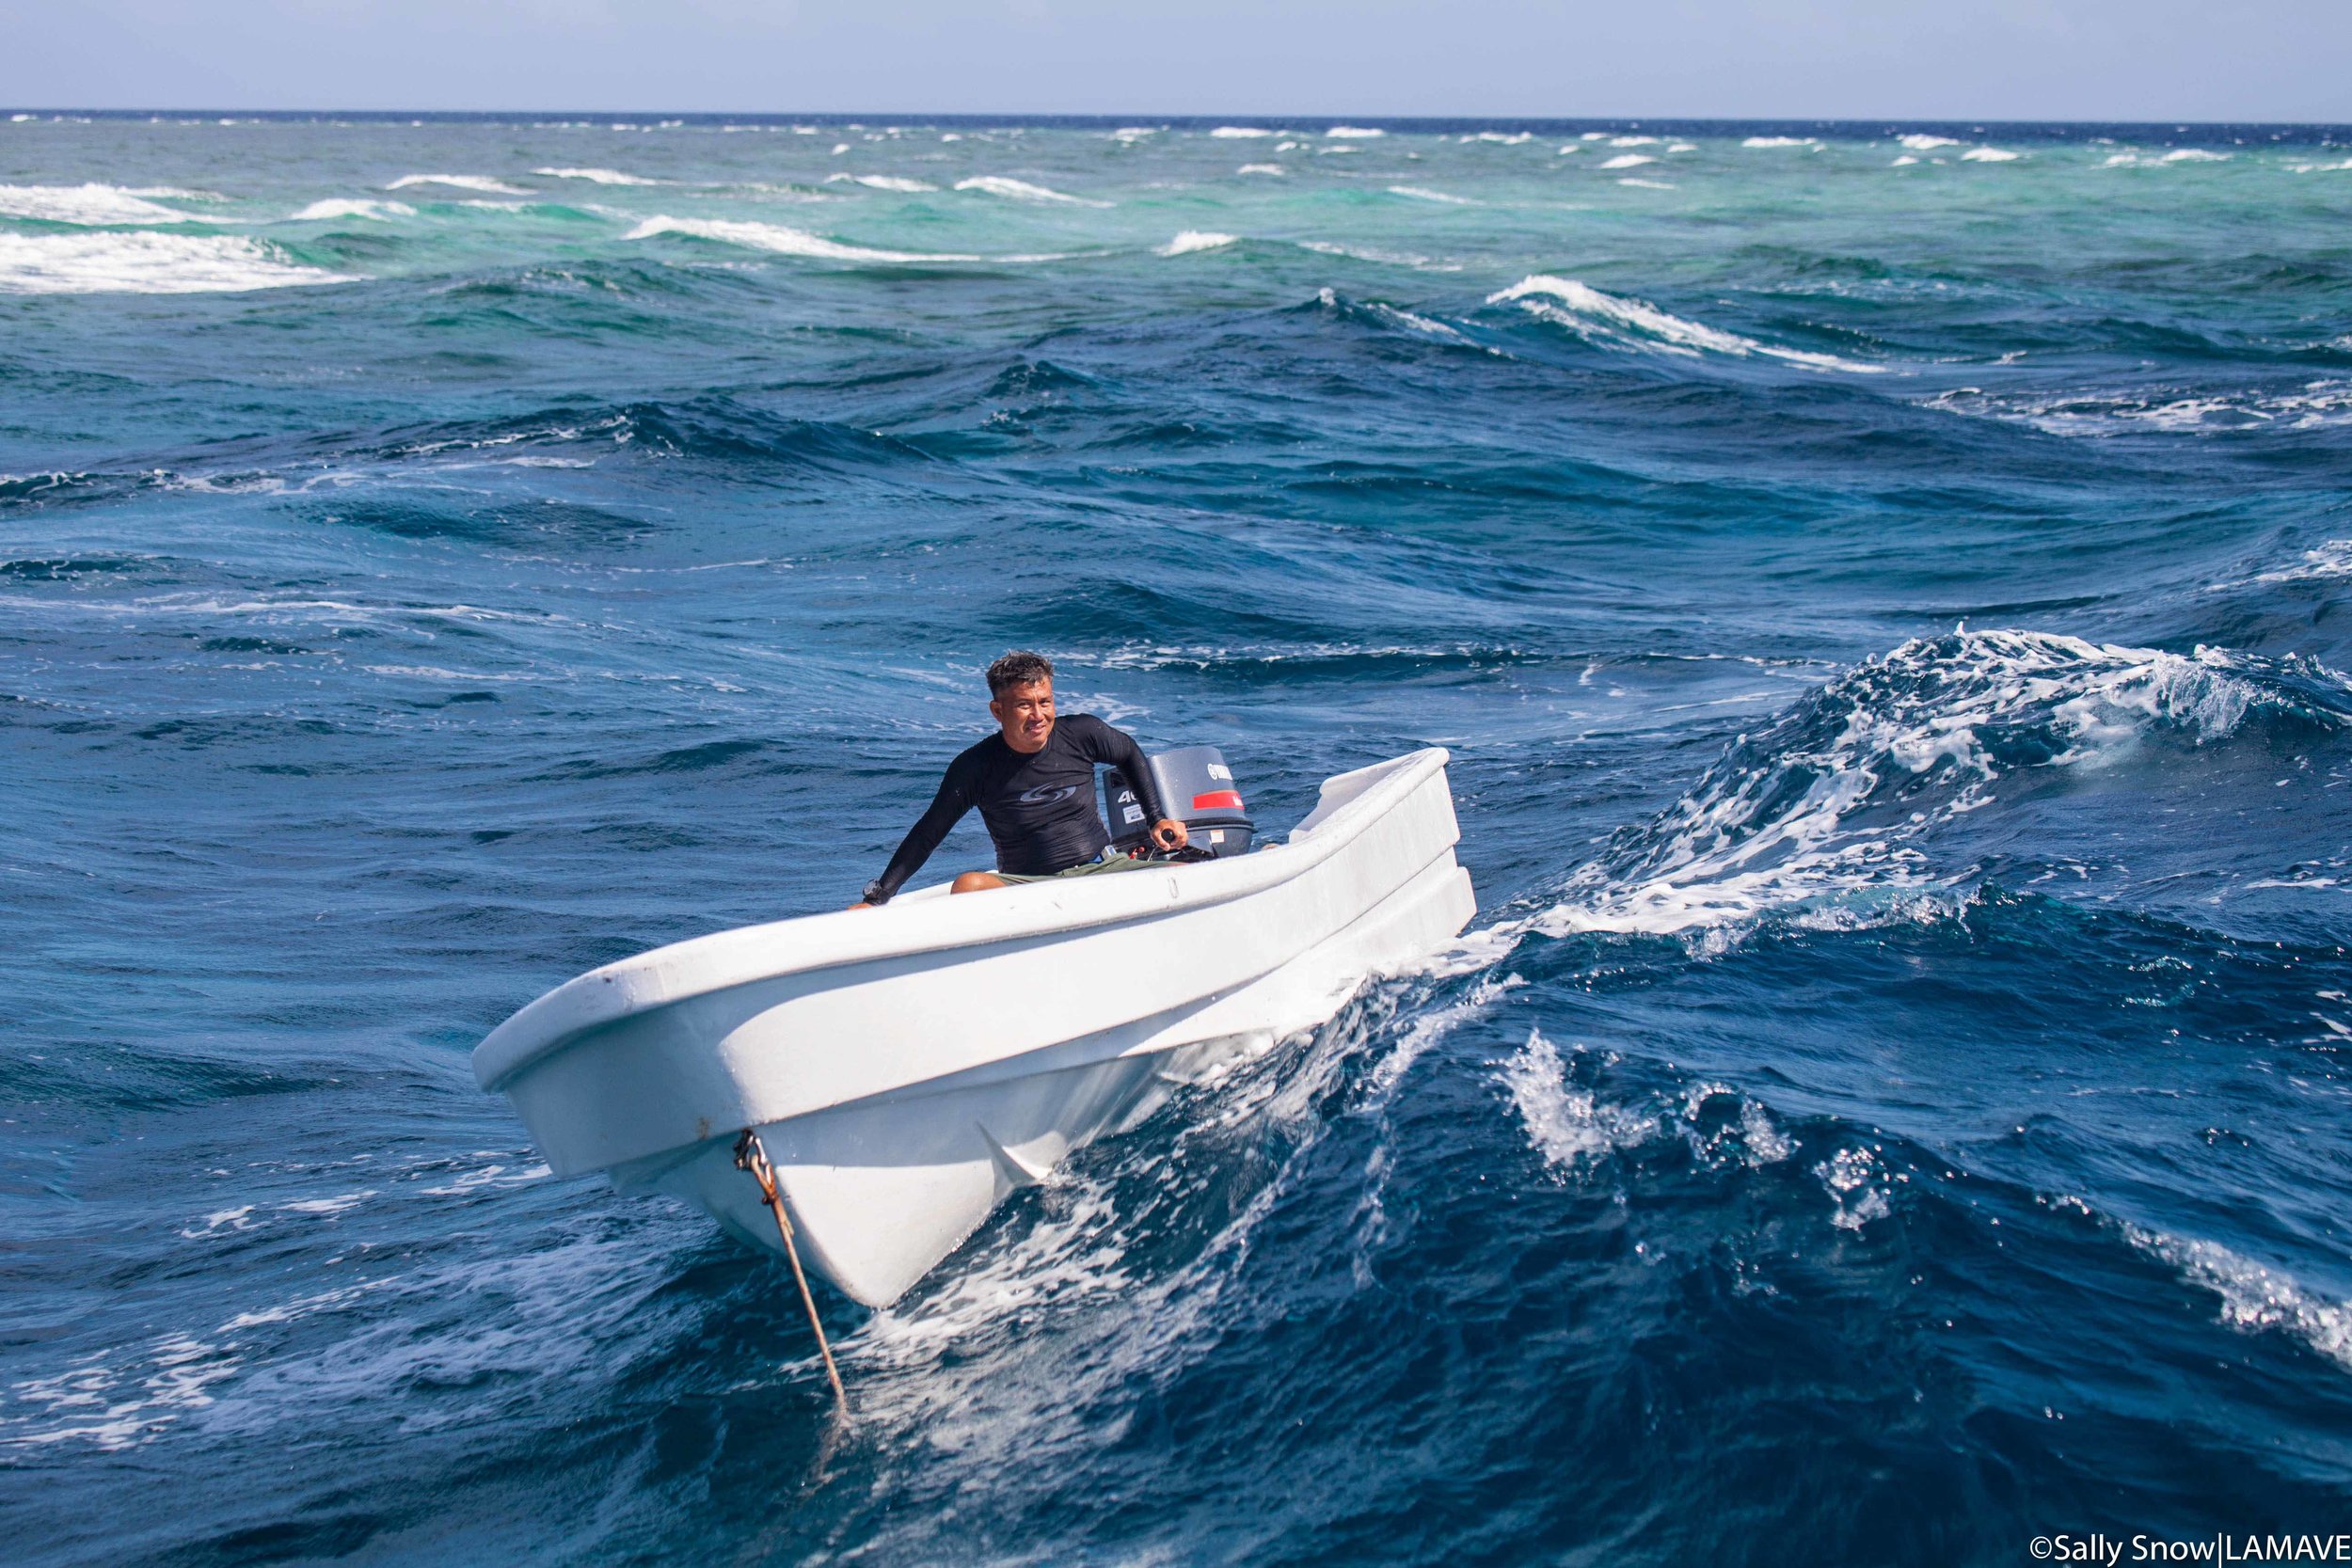   First-mate Don Don handles the research boat in rough weather (Credit: Sally Snow|LAMAVE).  